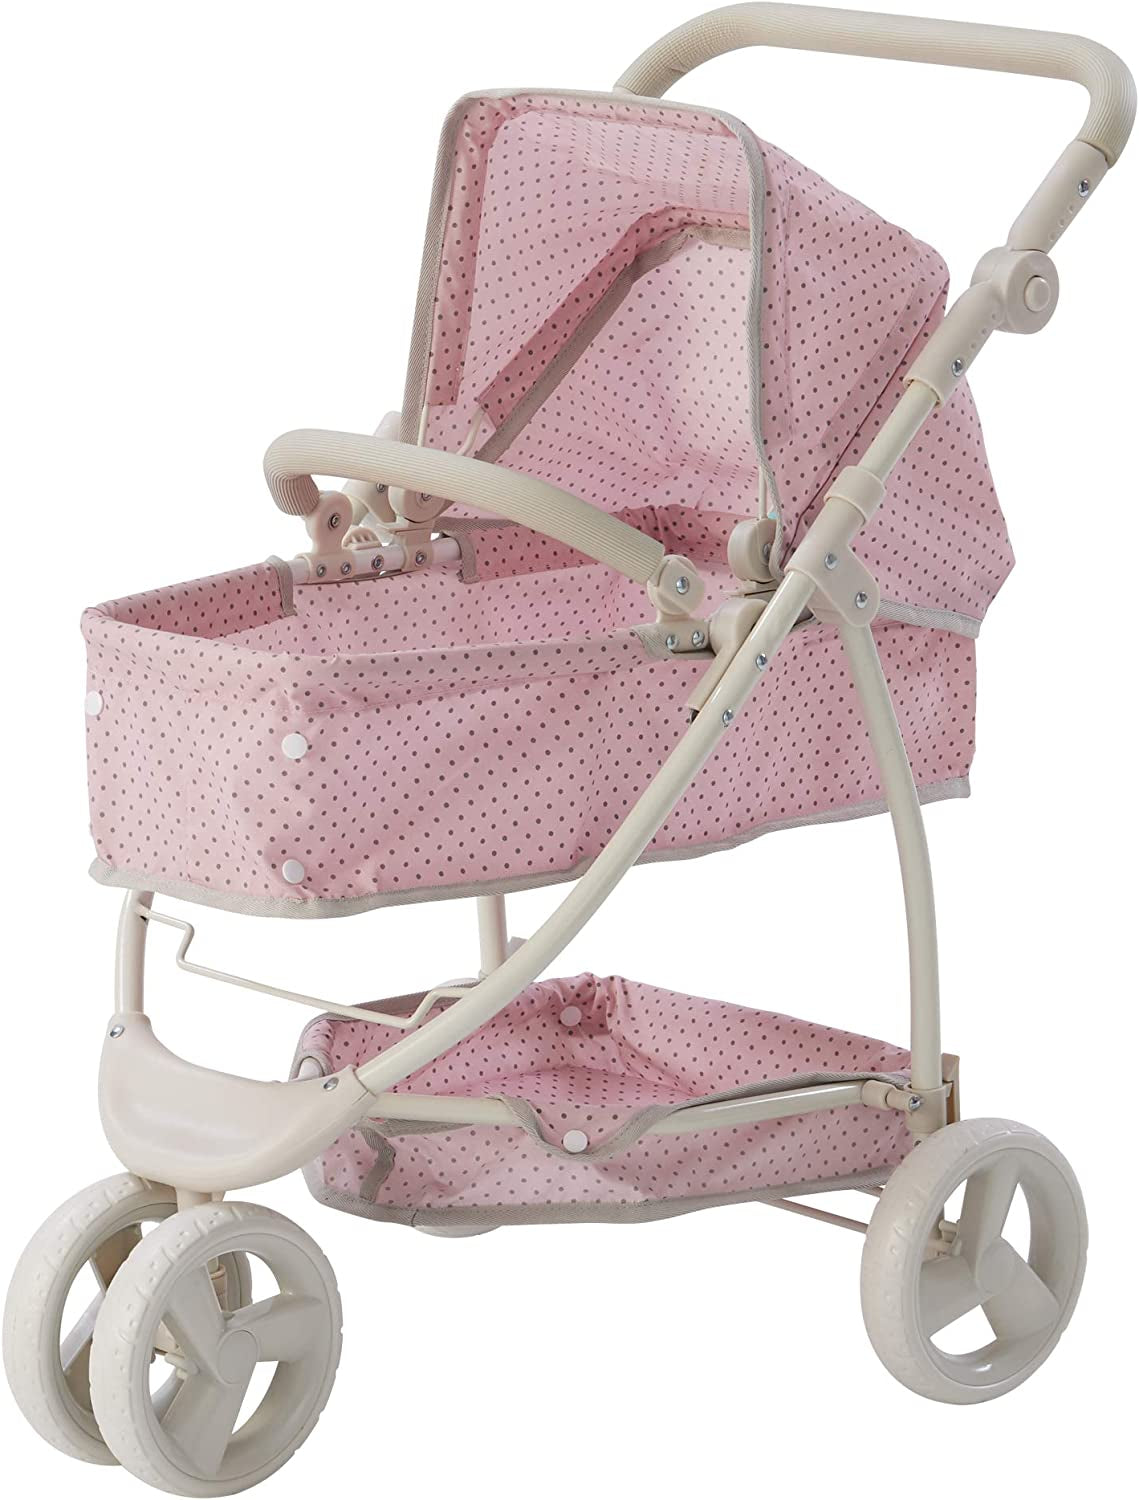 Olivia'S Little World Baby Doll Stroller Polka Dots Princess Collection, Convertible Doll Pram with Storage Basket for 18" Dolls, Pink & Gray